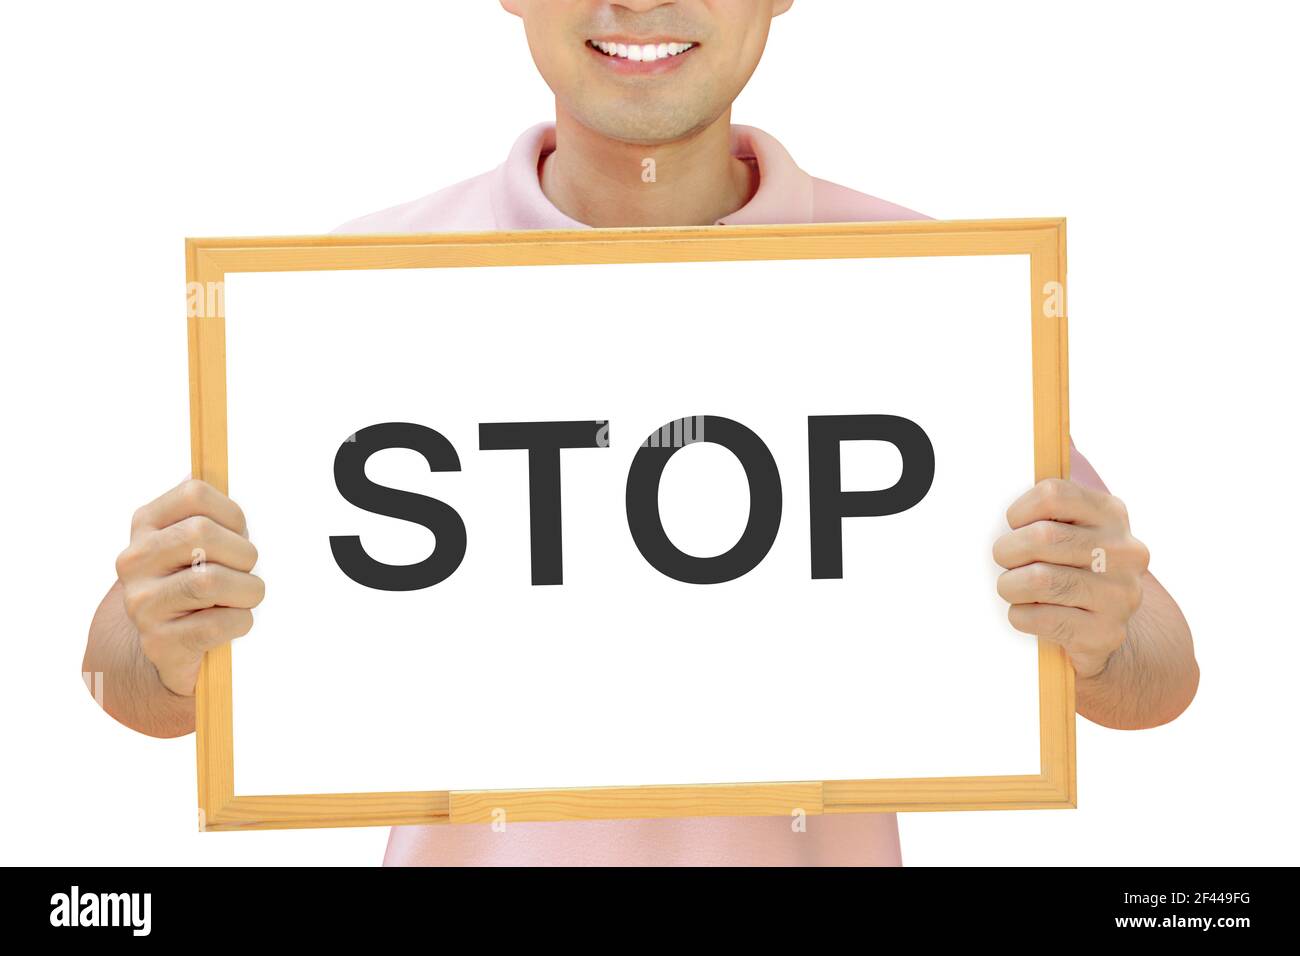 STOP sign on whiteboard held by smiling man Stock Photo